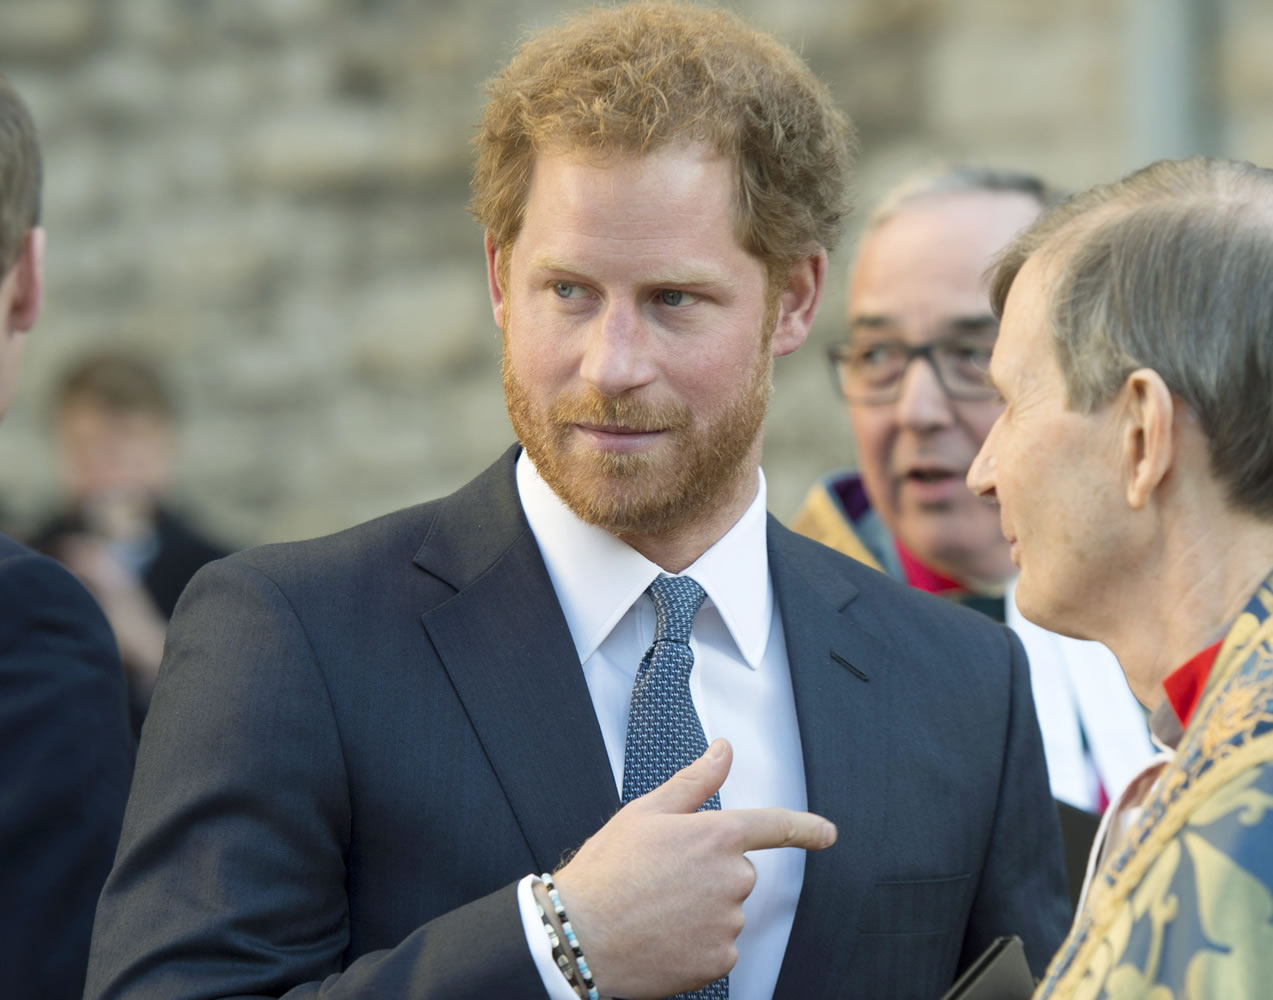 Prince Harry's five-day trip starts this weekend